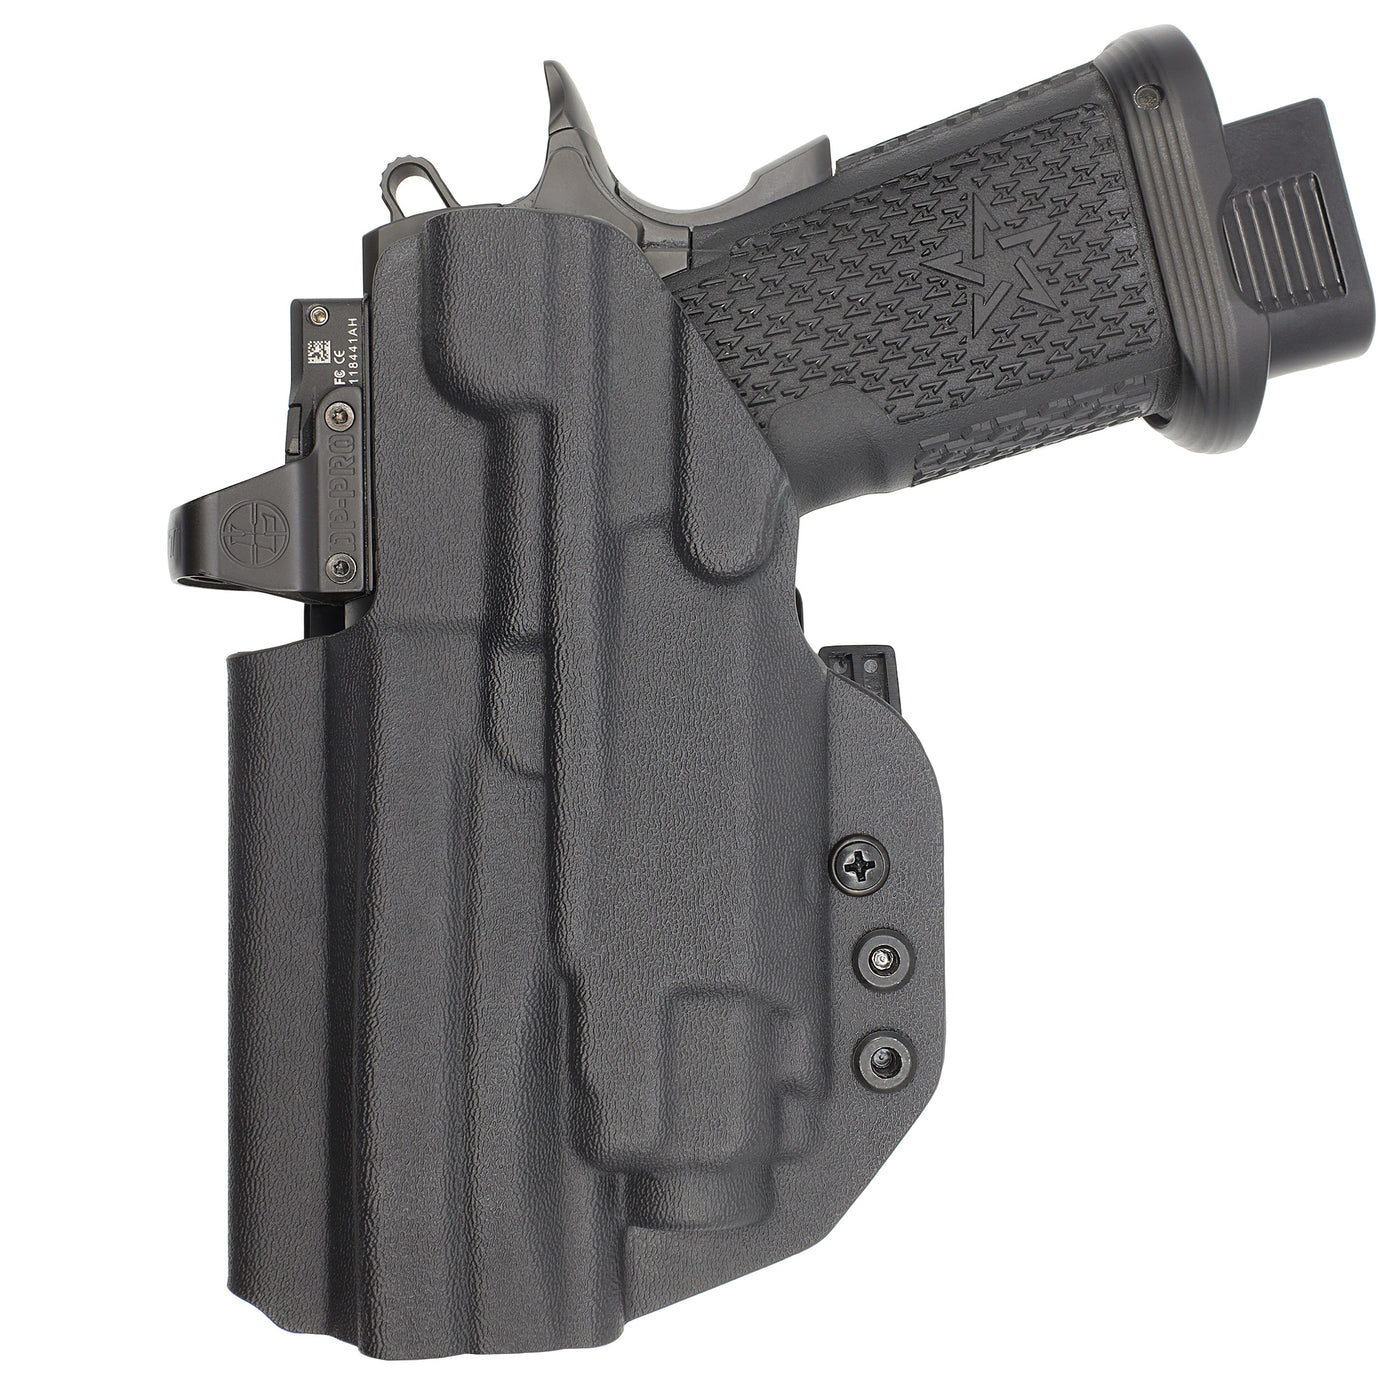 C&G Holsters custom IWB ALPHA UPGRADE tactical 2011 streamlight TLR8 holstered back view